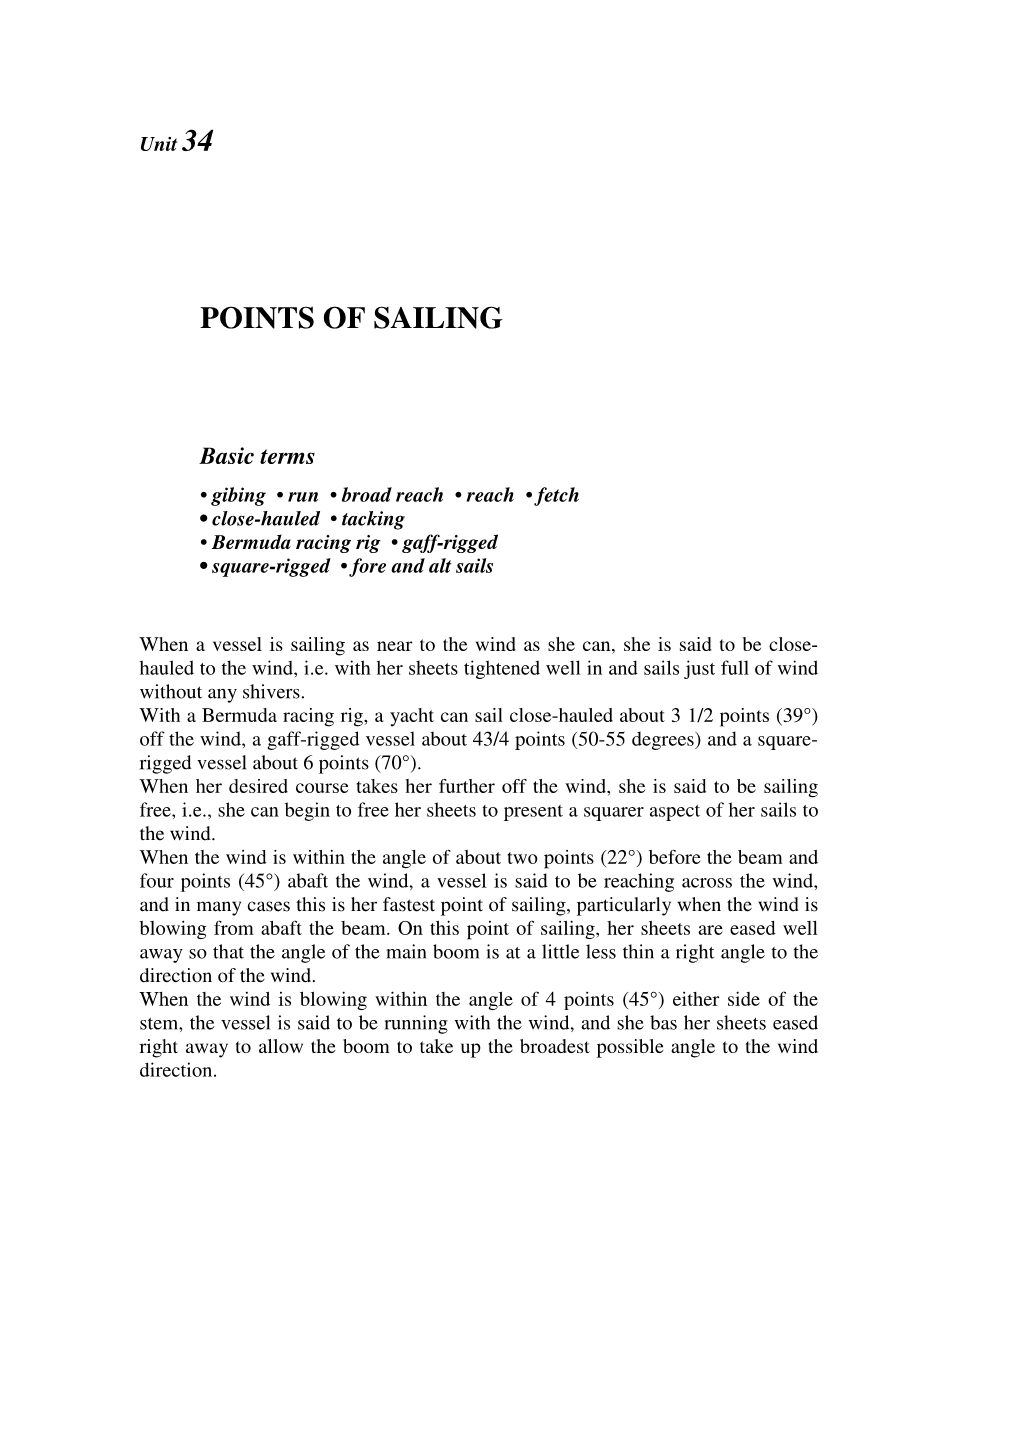 Points of Sailing